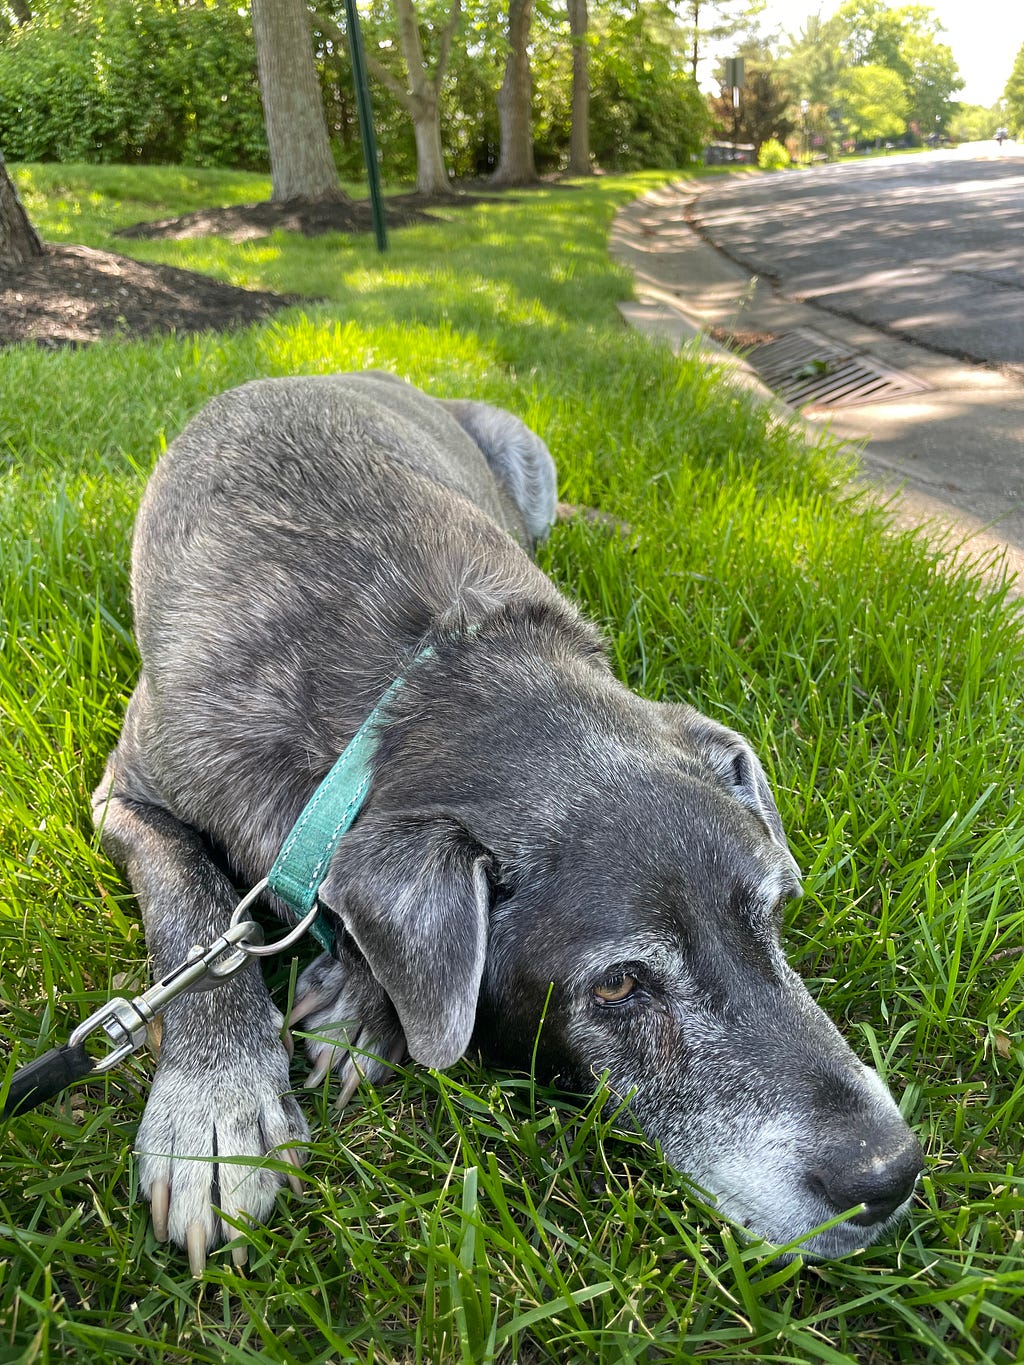 Photo of my dog Buddy lying in the grass, too tired to walk anymore